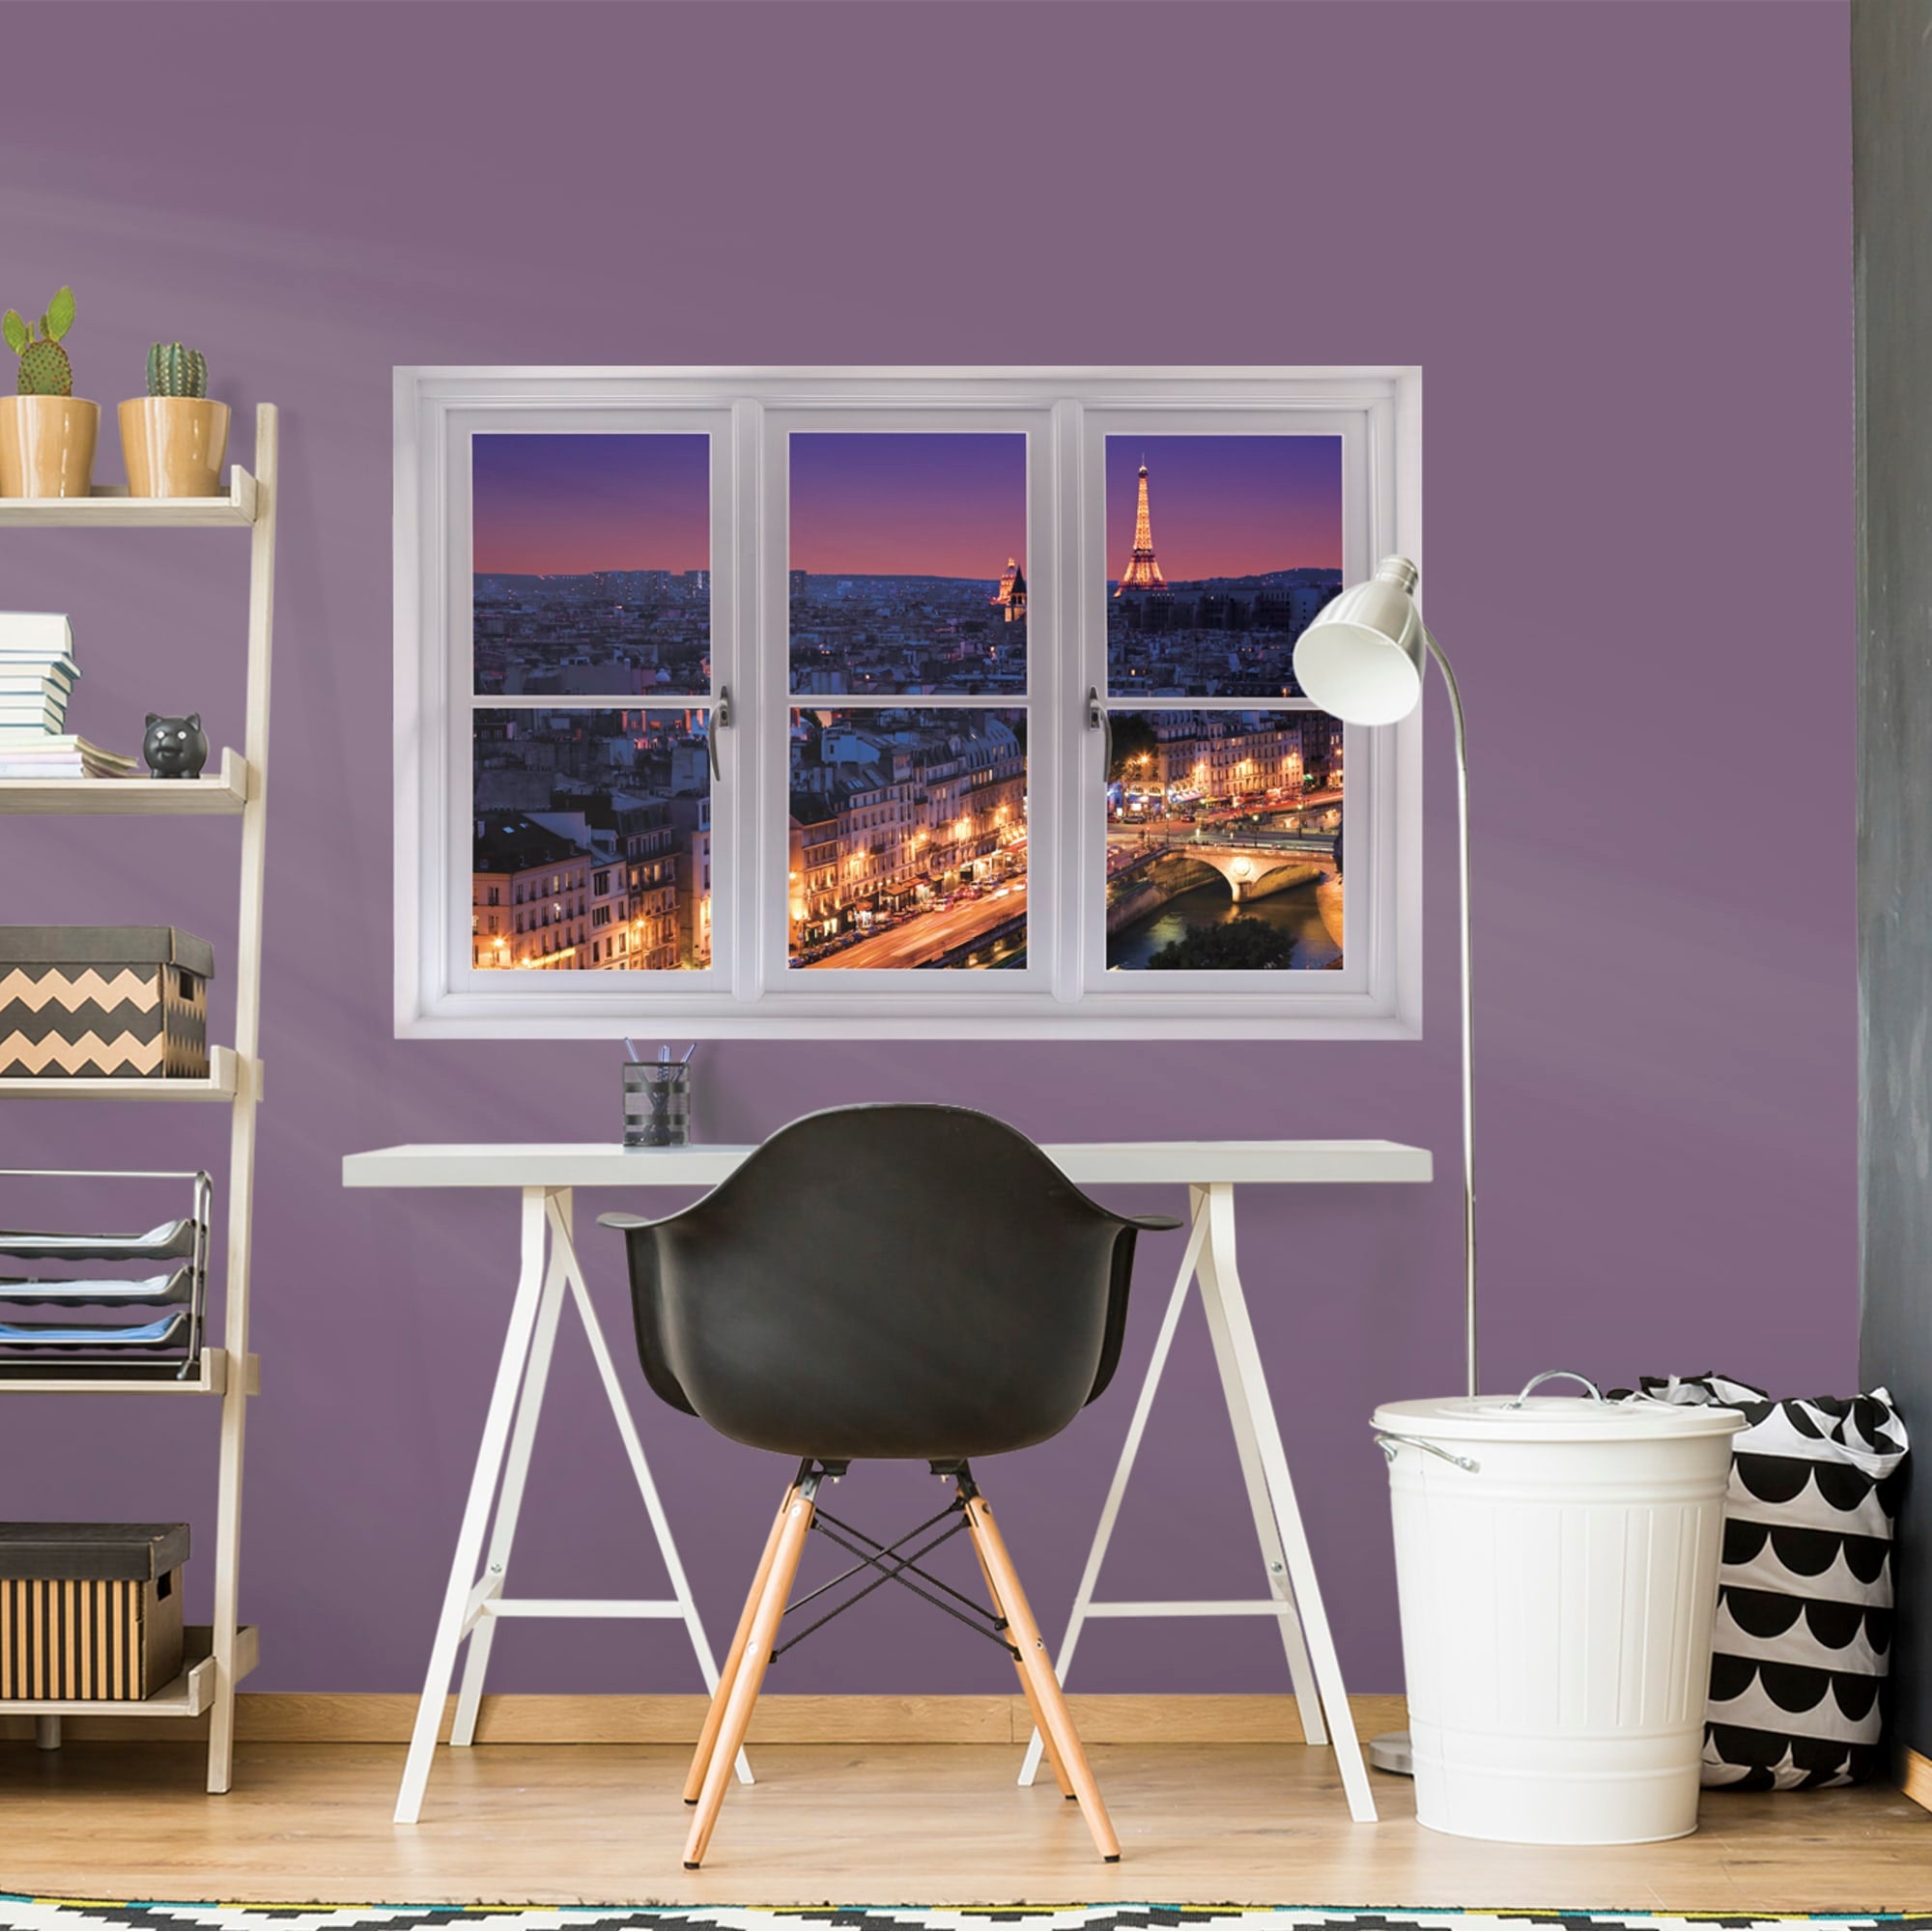 Instant Window: Paris Skyline at Night - Removable Wall Graphic 51.0"W x 34.0"H by Fathead | Vinyl